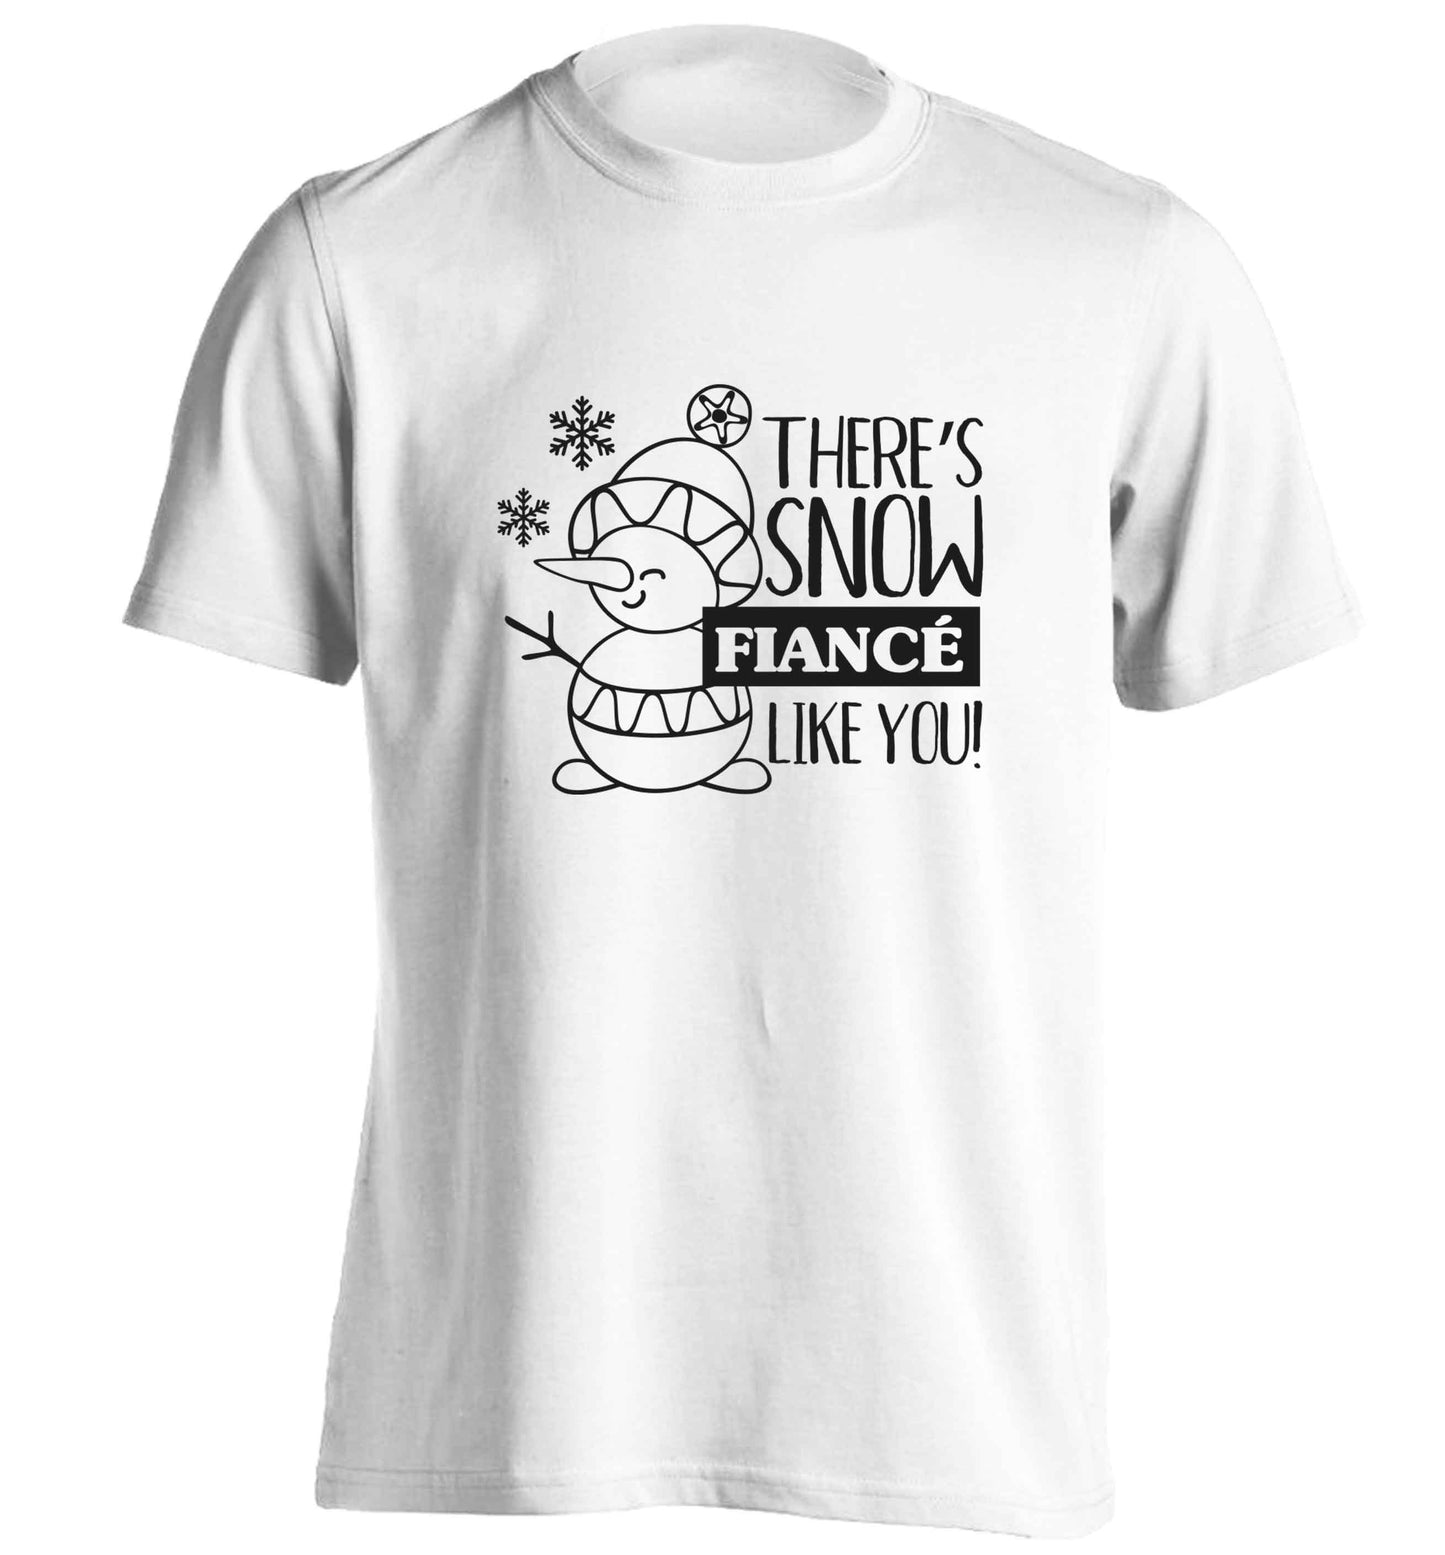 There's snow fiance like you adults unisex white Tshirt 2XL